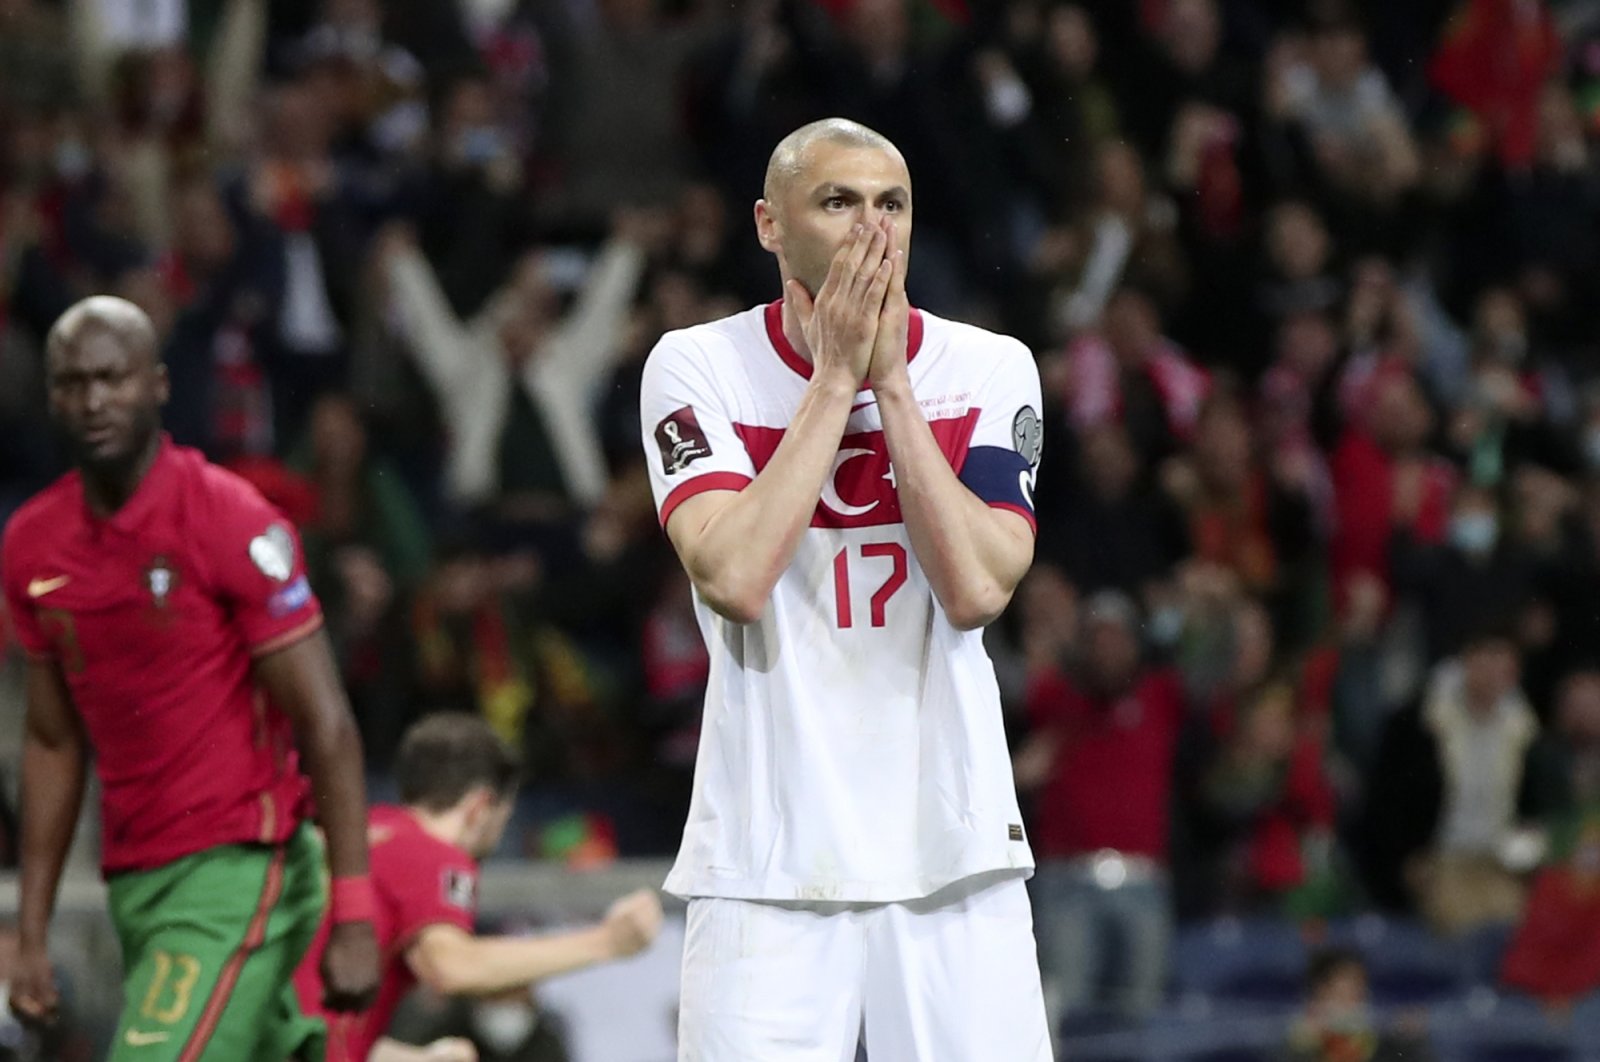 Turkey striker Burak Yılmaz reacts after missing a penalty shot during the World Cup qualifier match against Portugal, at the Dragao stadium in Porto, Portugal, March 24, 2022. (AP Photo)